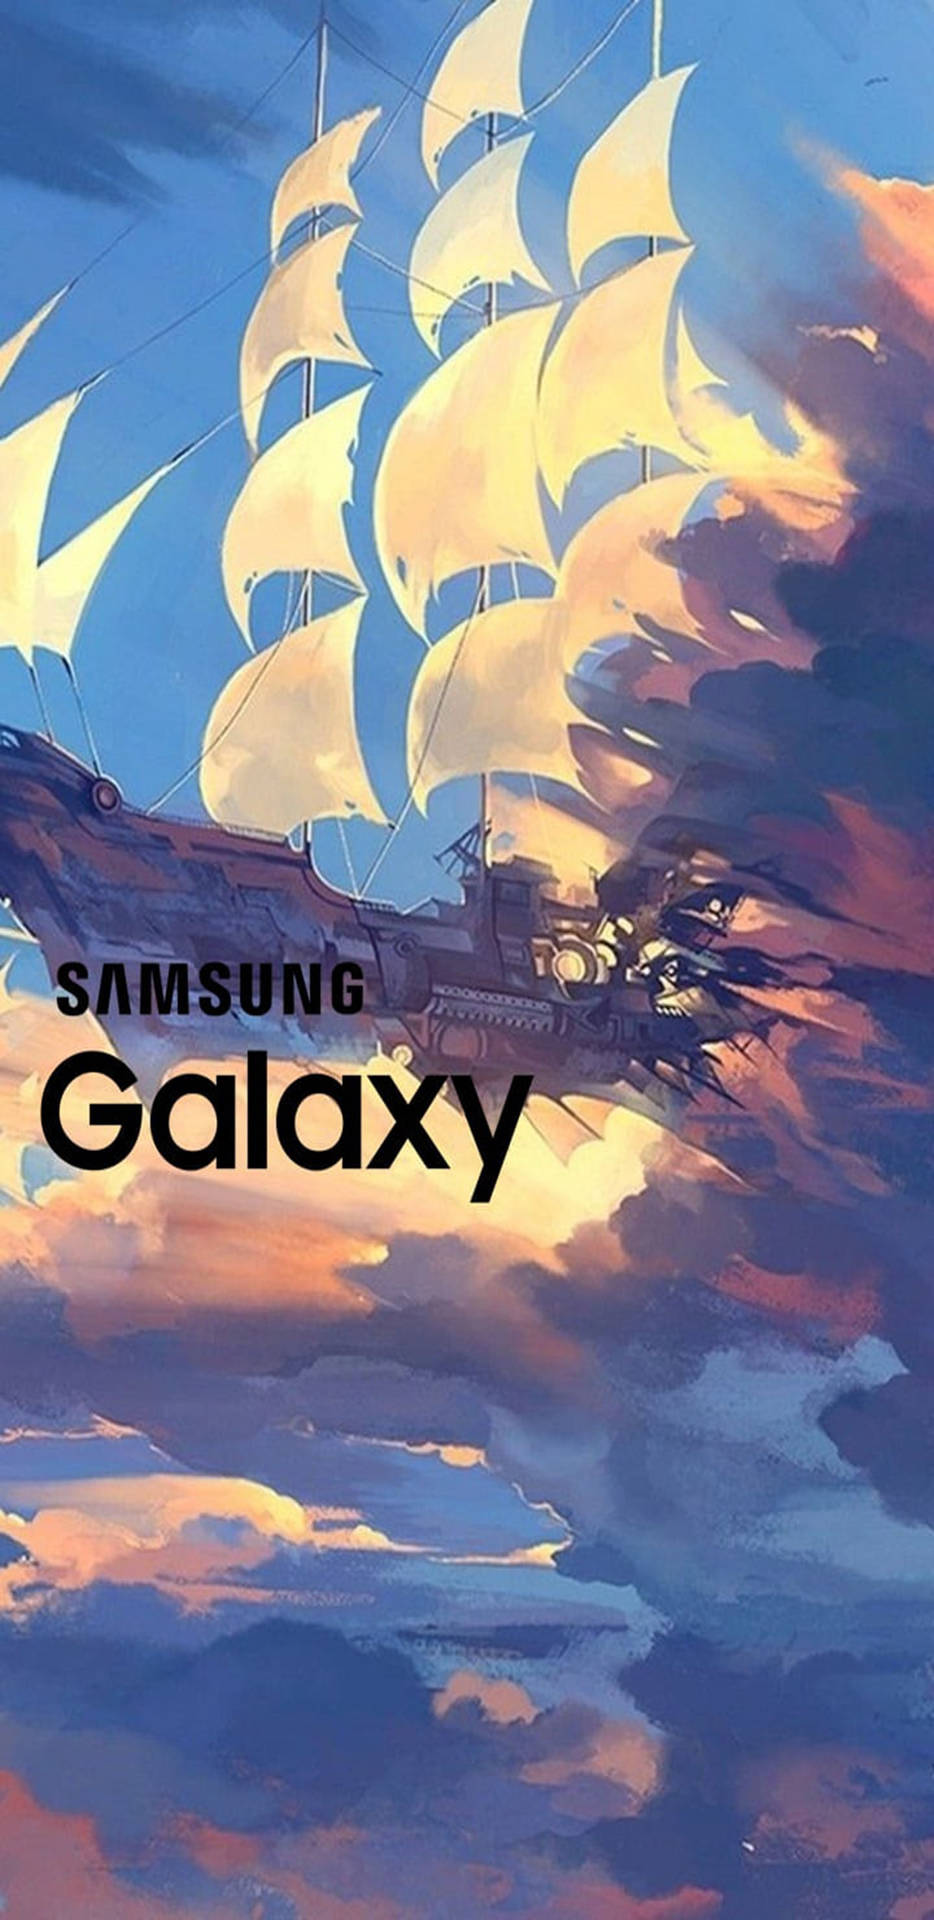 Samsung Galaxy Vintage Ship Painting Background